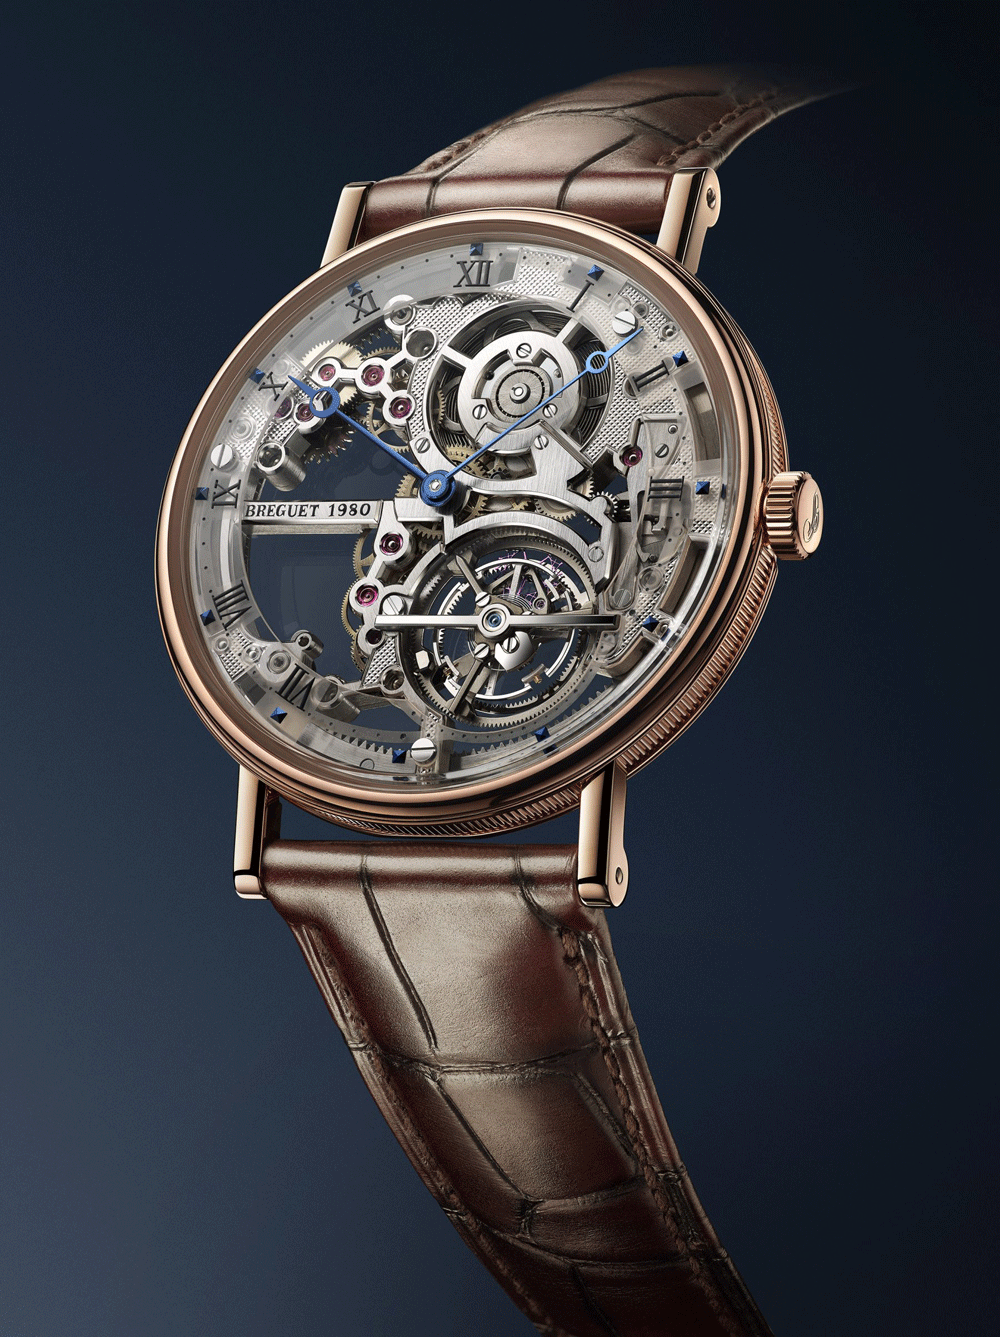 The top 10 most expensive watches of 2019 so far | Esquire Middle East ...